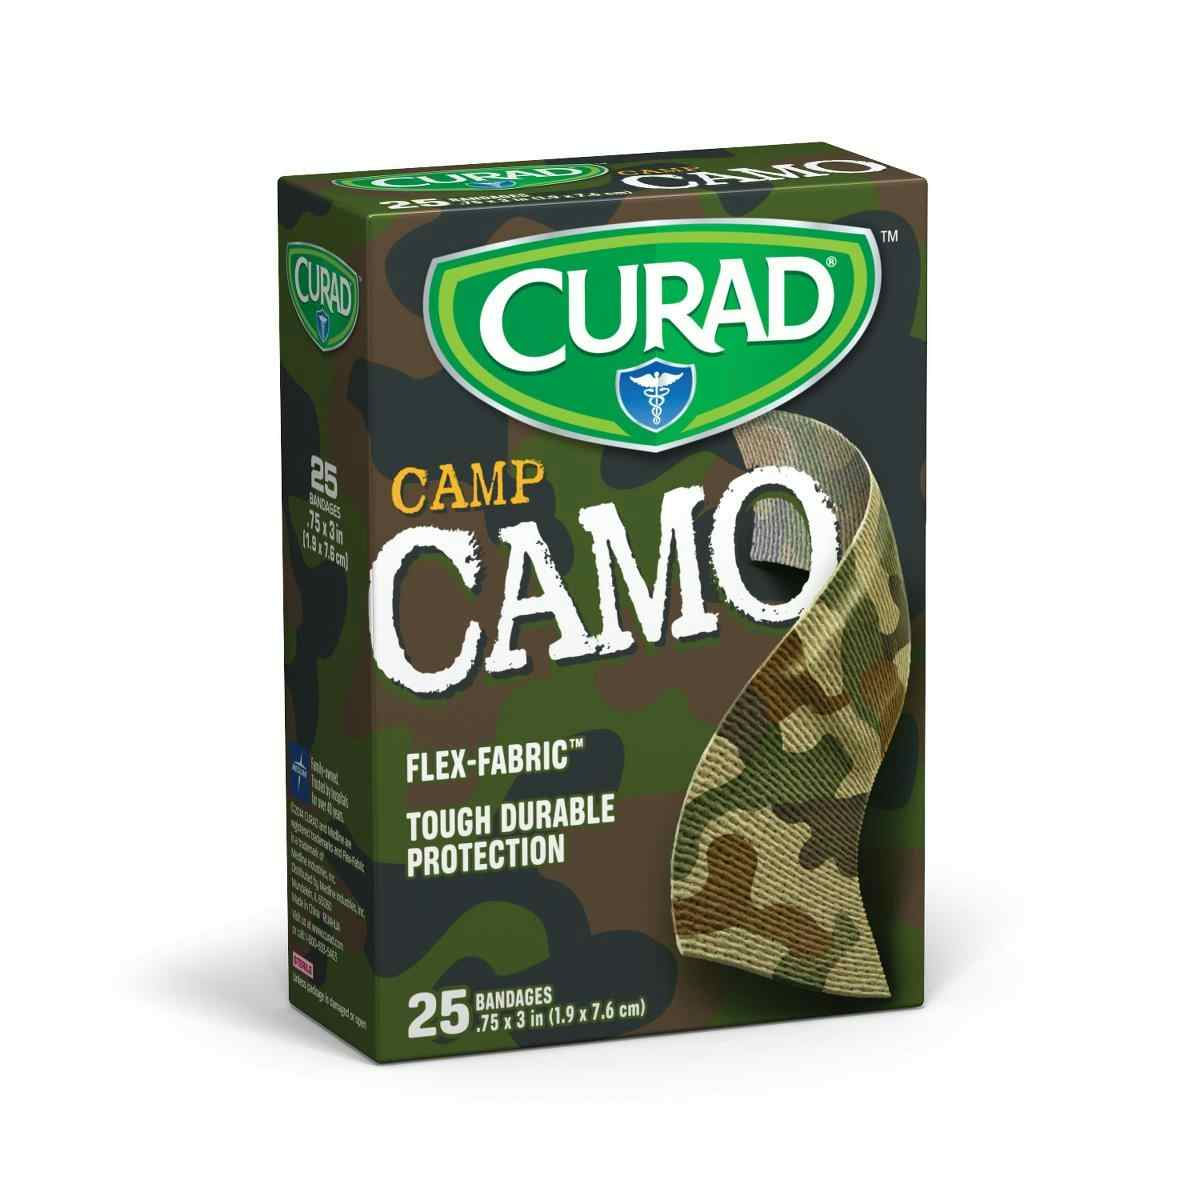 Curad Camp Camo Flex-Fabric Adhesive Bandages, CUR45701RB, Green - 3/4" X 3" - Case of 24